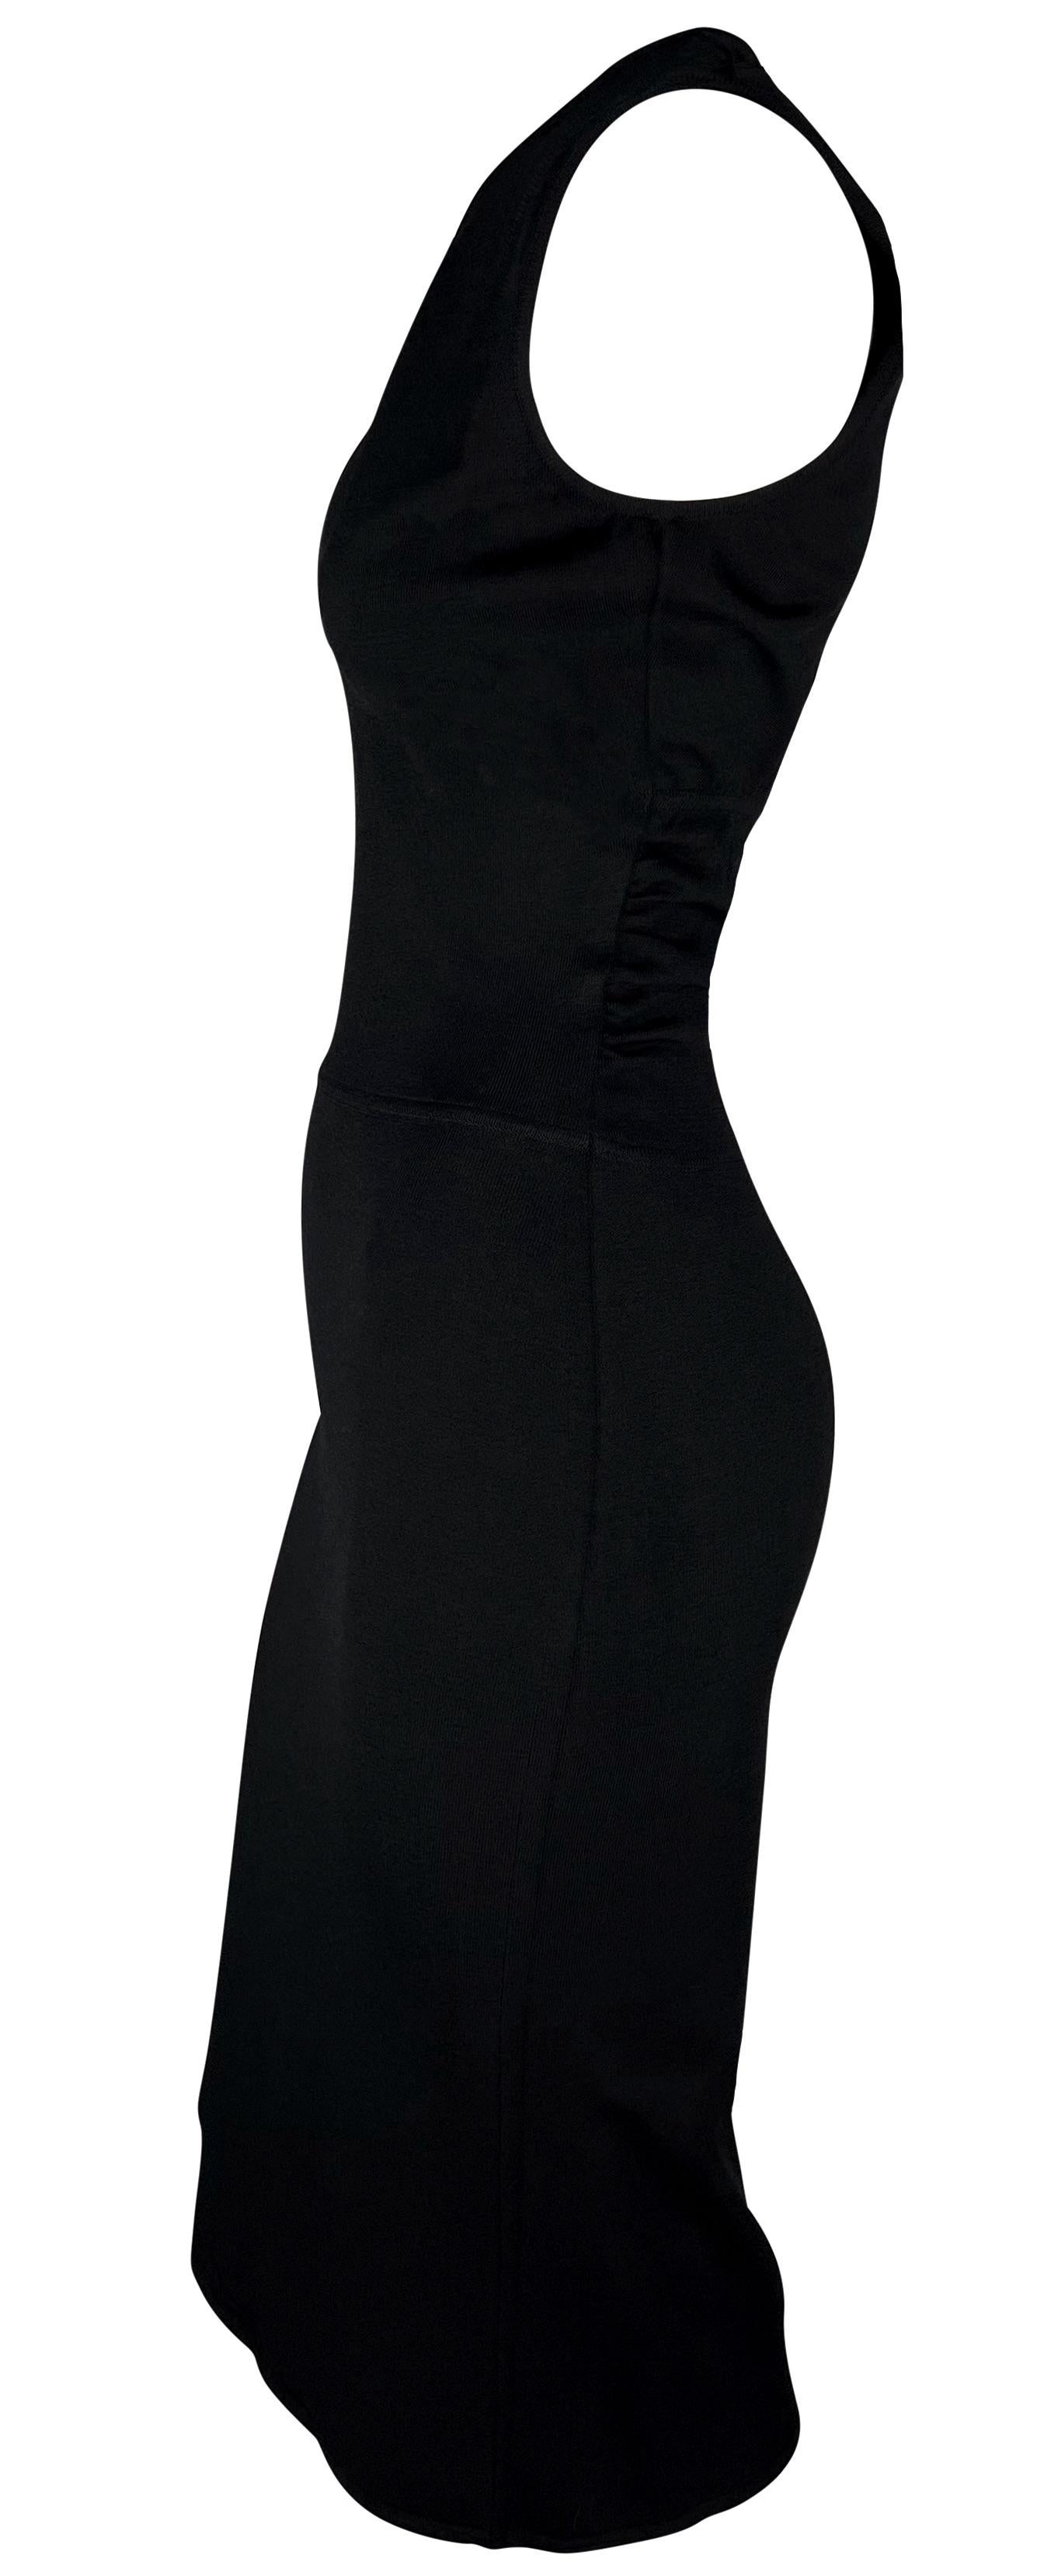 Women's S/S 2000 Gucci by Tom Ford Black Stretch Knit Leather Bow Sleeveless Dress For Sale